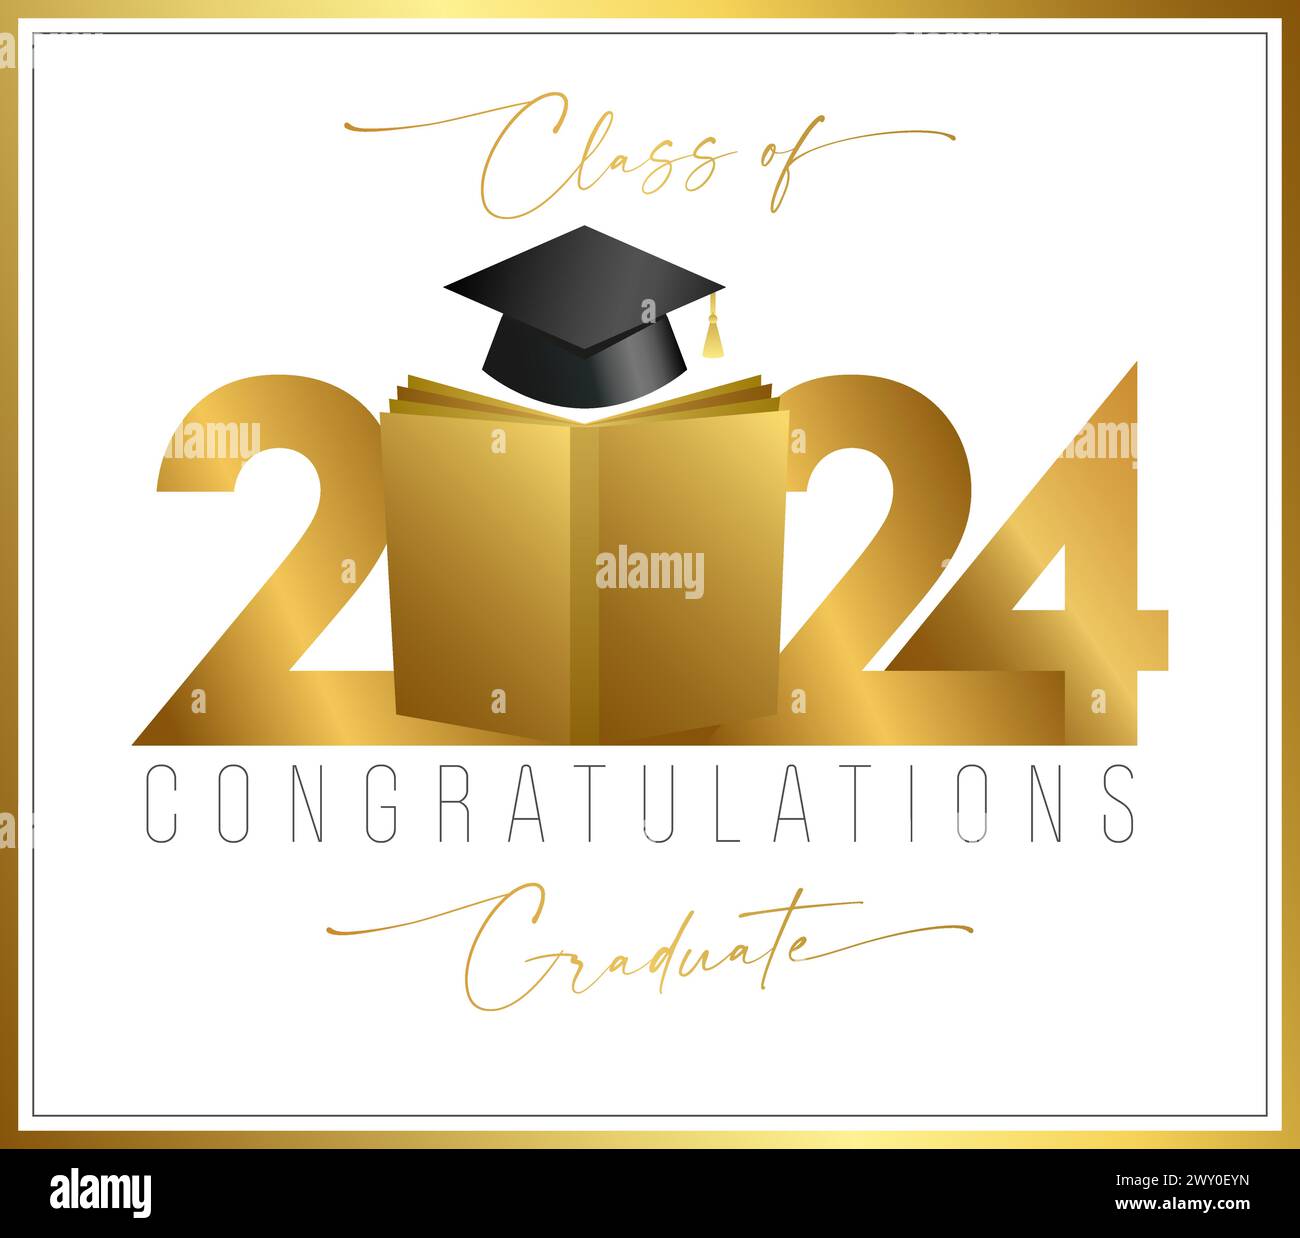 Class of 2024 graduation congrats. Golden number 20 24 with open book. 3D graphic elements. Diploma design. Wallpaper banner with cute gold frame. Stock Vector